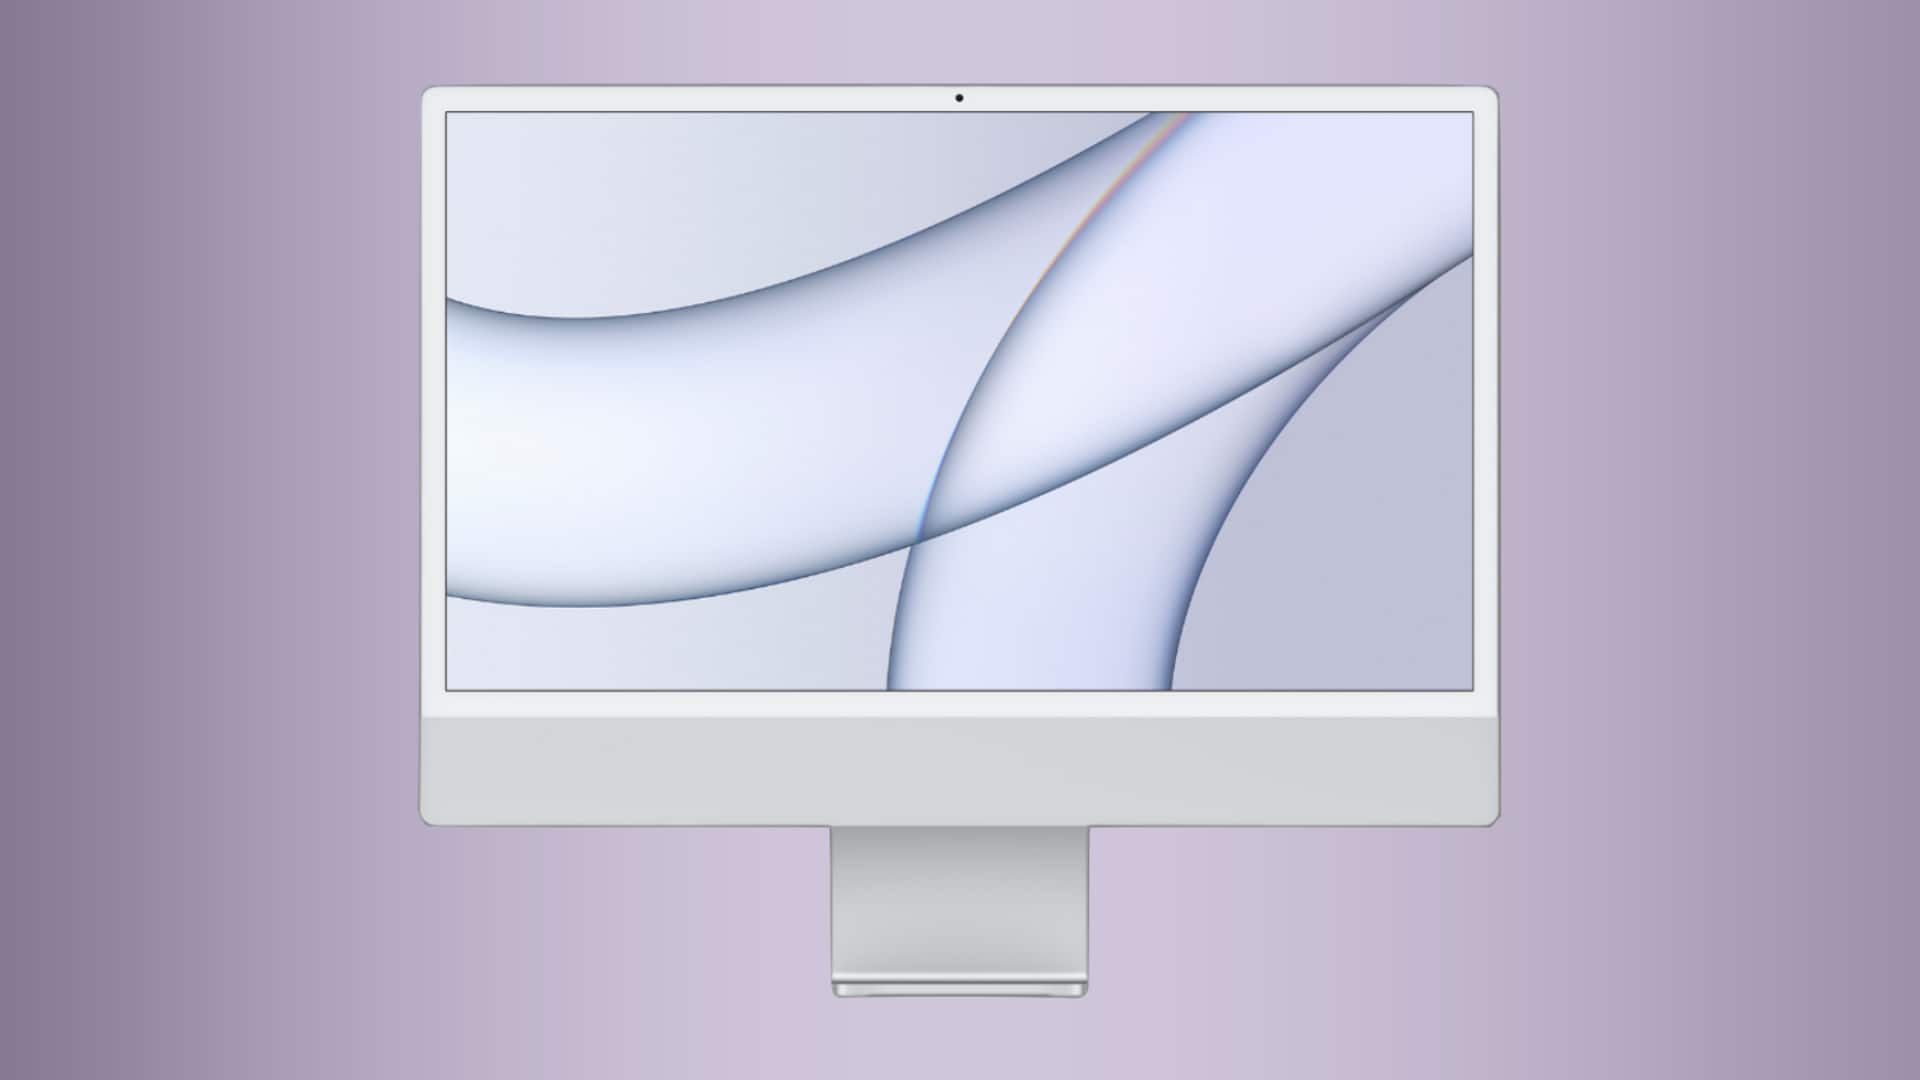 Apple to announce new 24-inch iMac later this month: Report